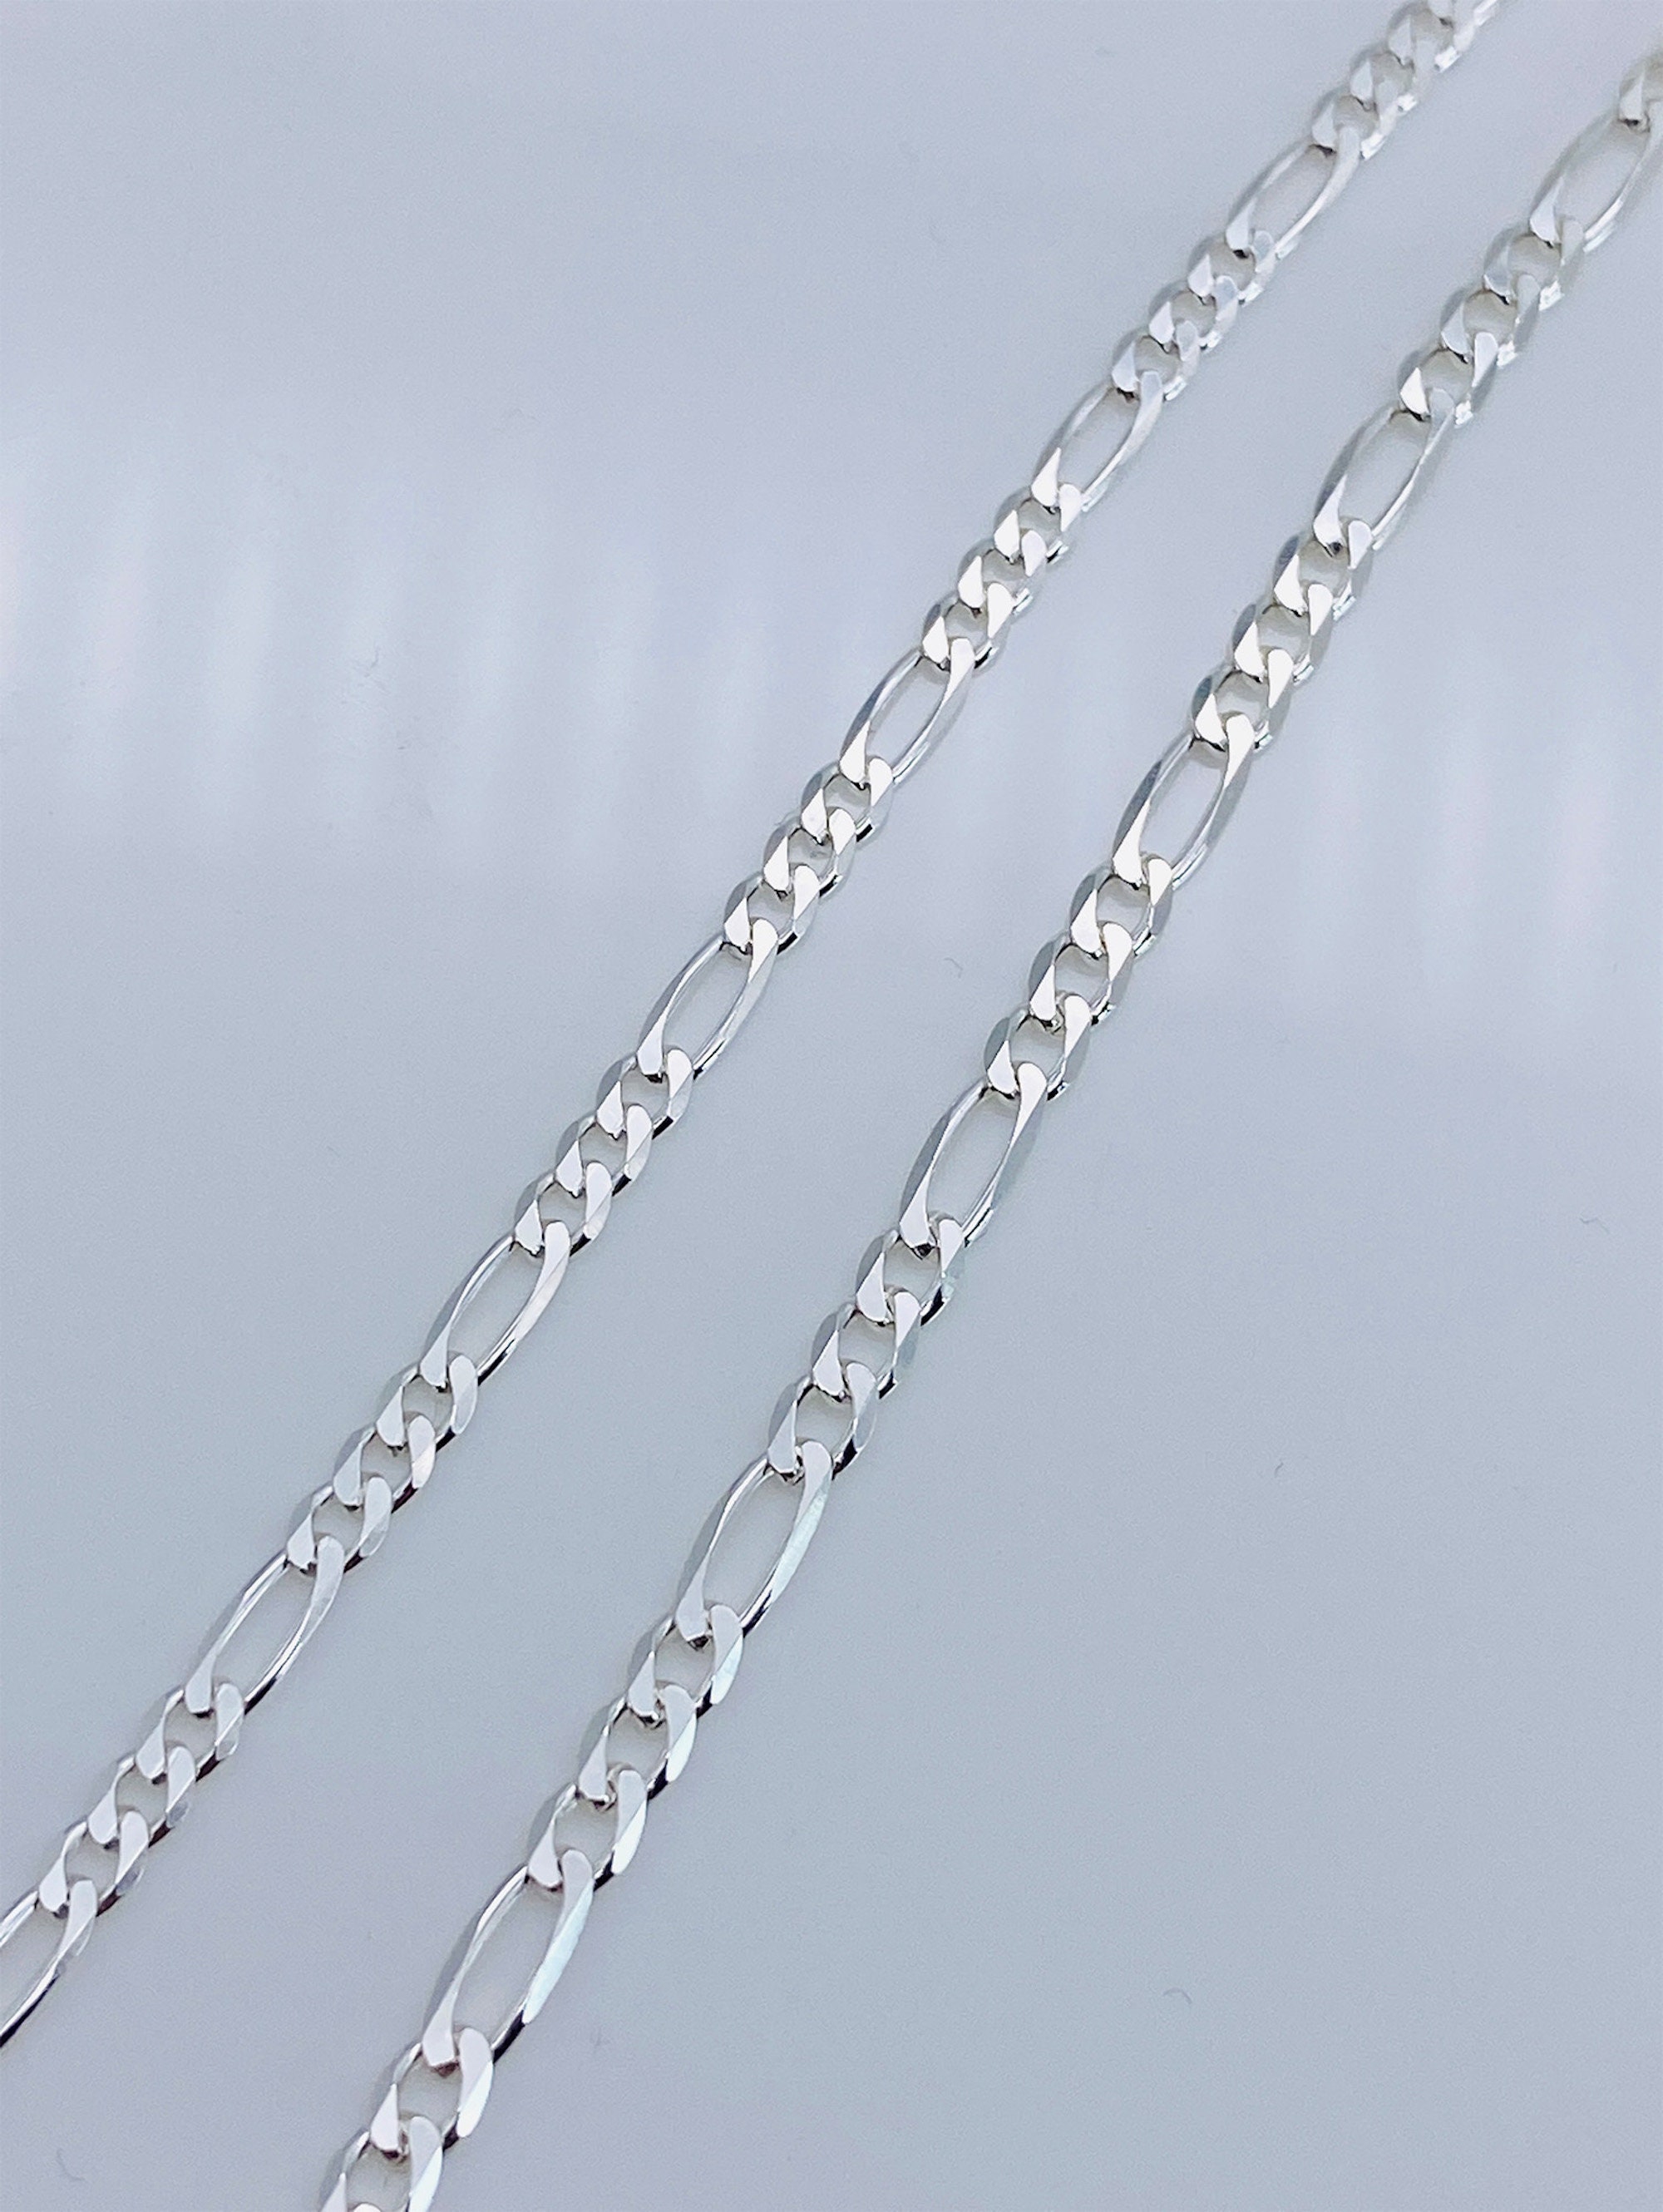 Sterling Silver Figaro Chain Necklace for Woman/ Men 1mm*3mm, 16 18 20 22 24 26 28 30 Made in Italy, Replacement Chain for Necklace